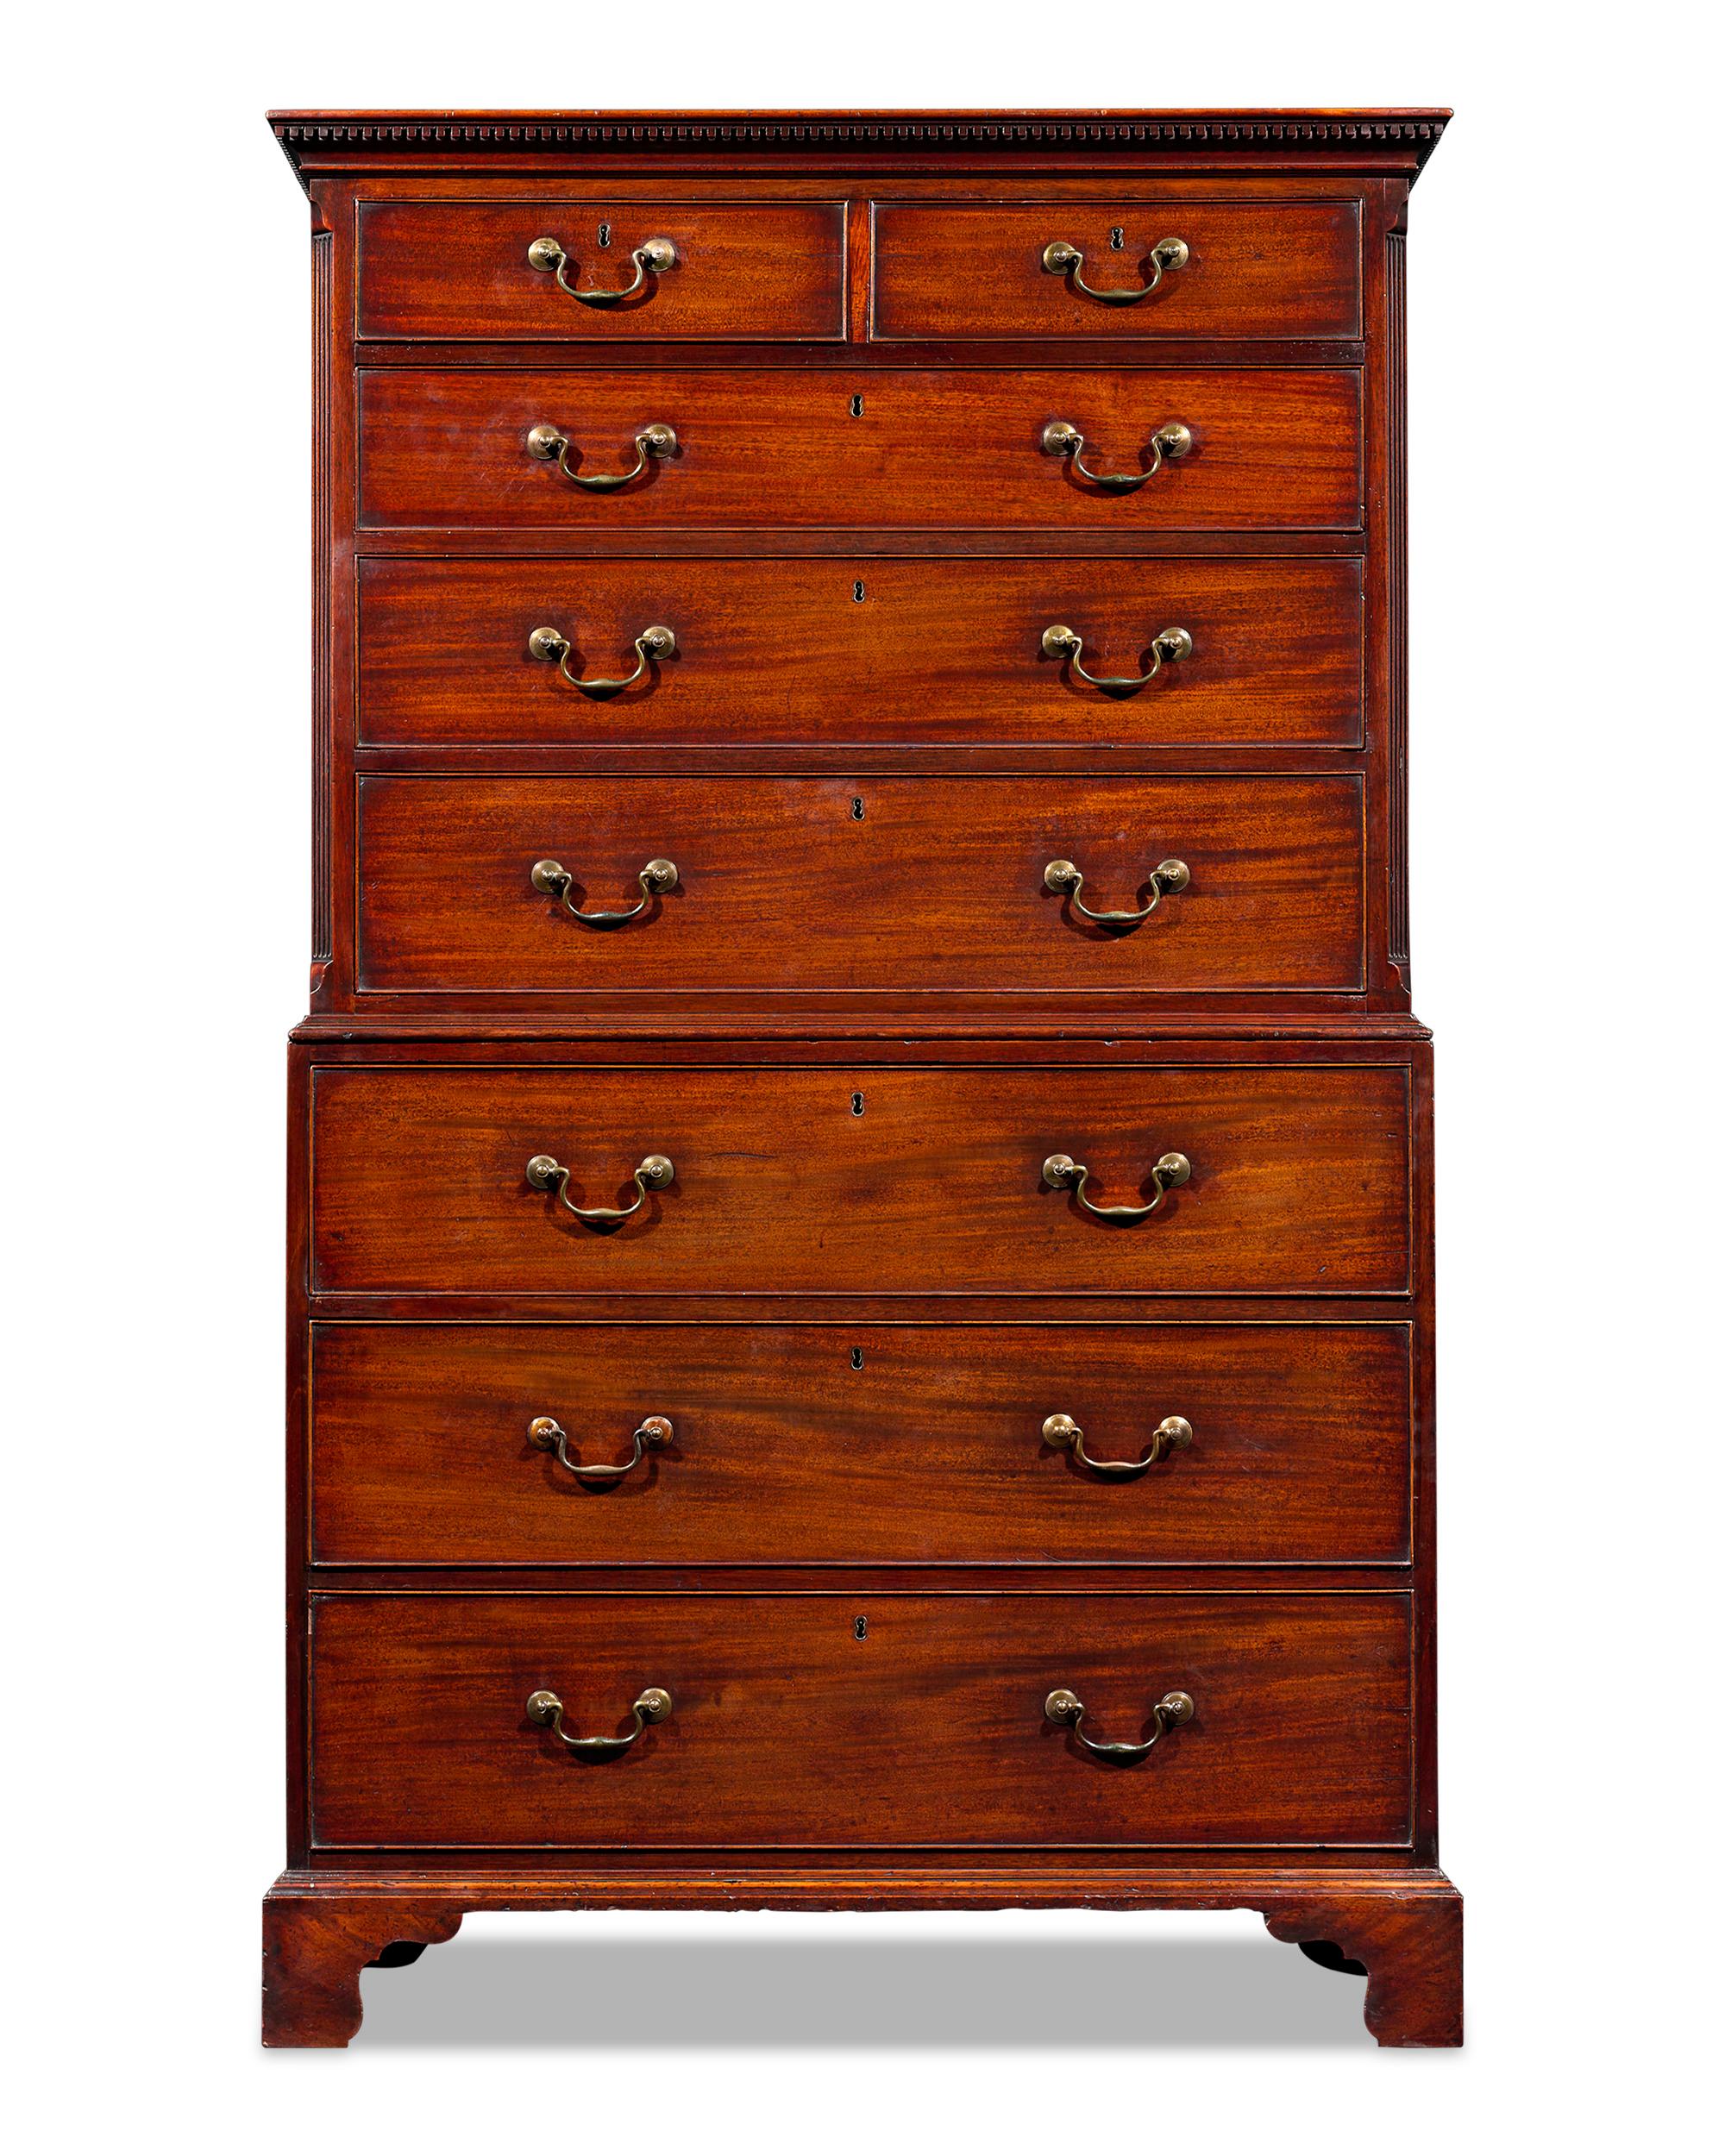 Furniture created by the exalted Thomas Chippendale is distinguished by a signature blend of spectacular artistry, materials and design, and this chest on chest is no exception. Brilliant lines, perfect proportion and overall commanding workmanship